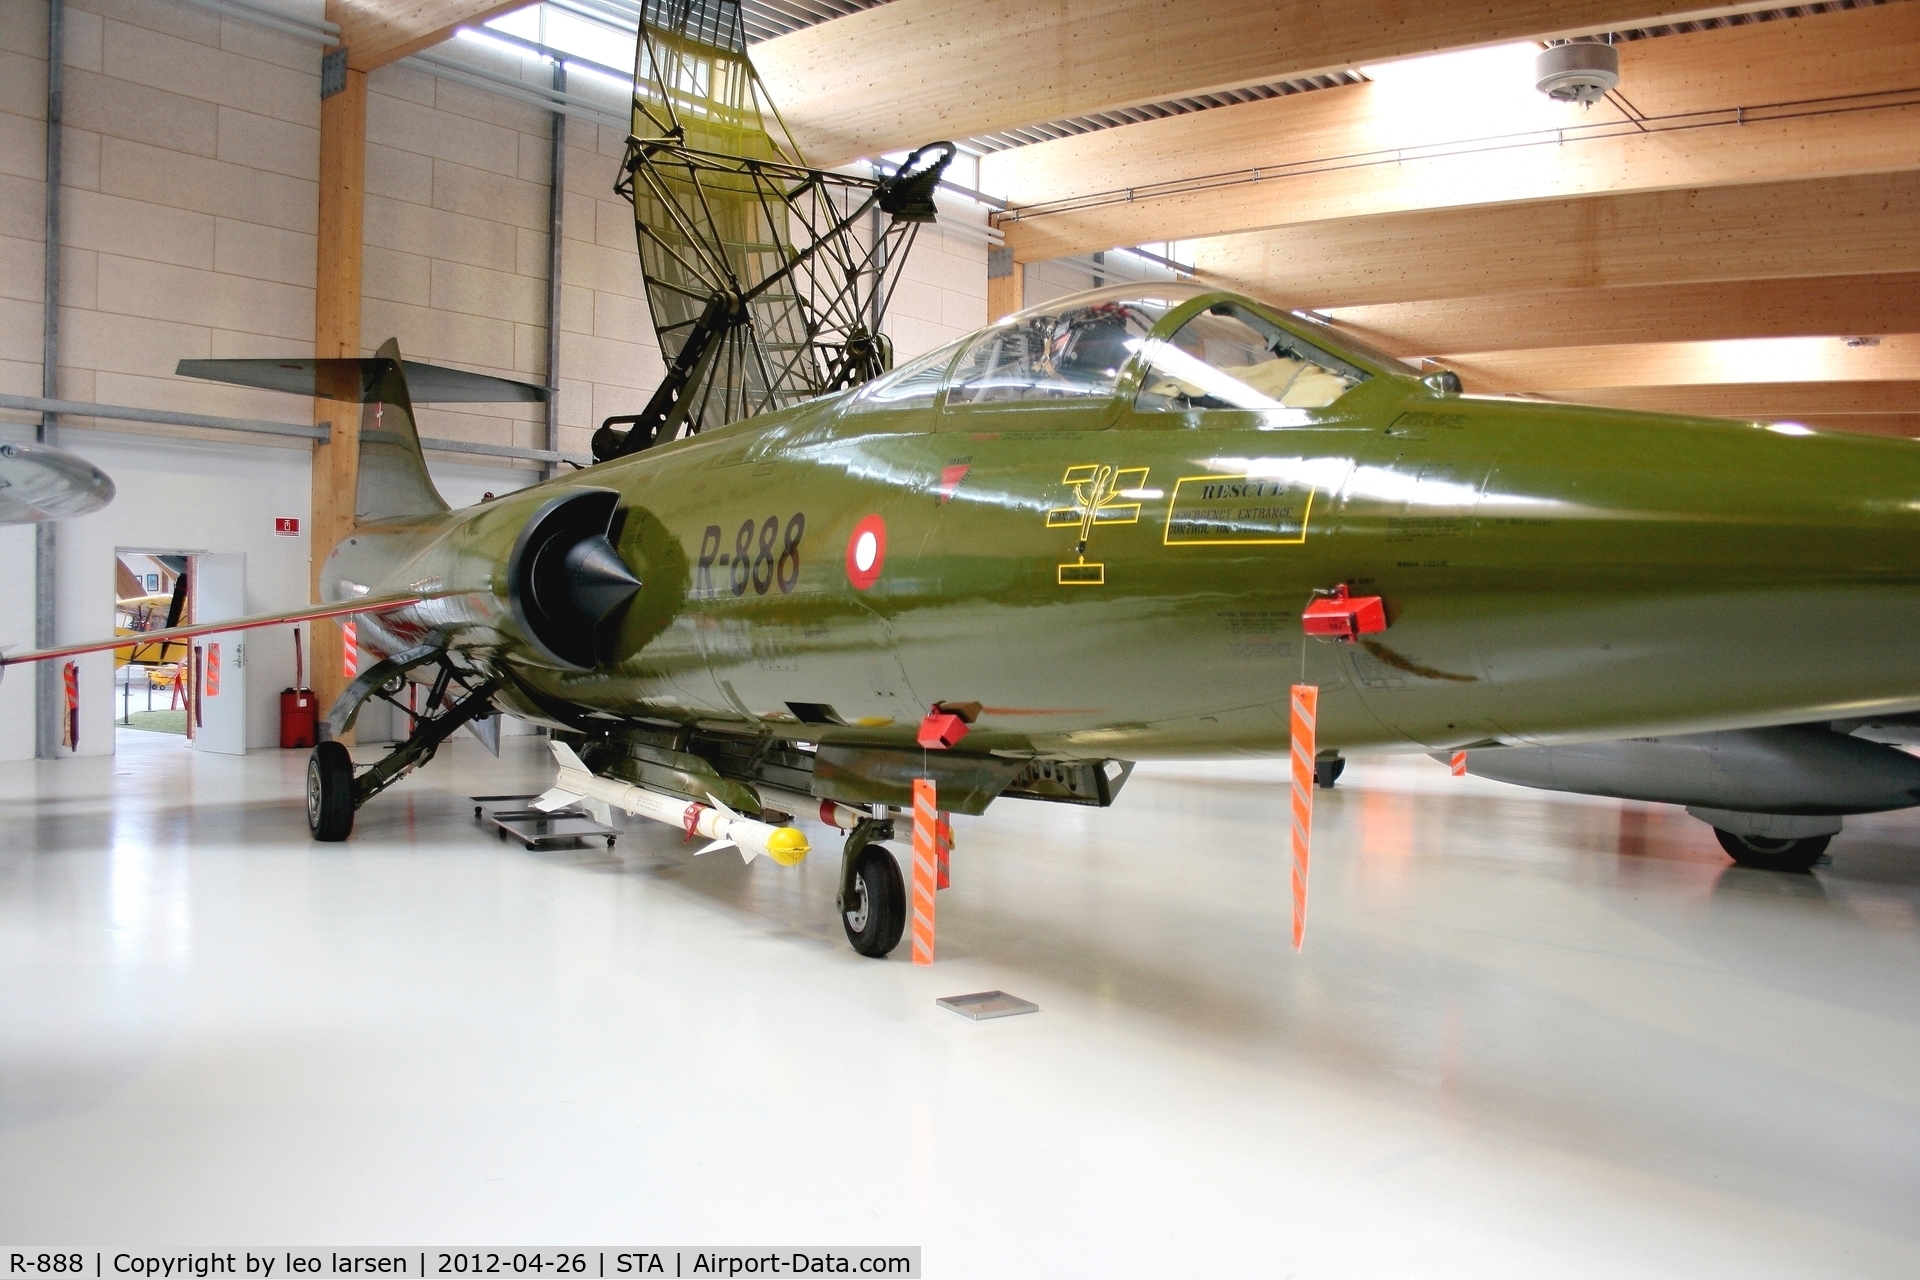 R-888, 1971 Canadair CF-104 Starfighter C/N 683A-1188, Stauning Museum 26.4.2012